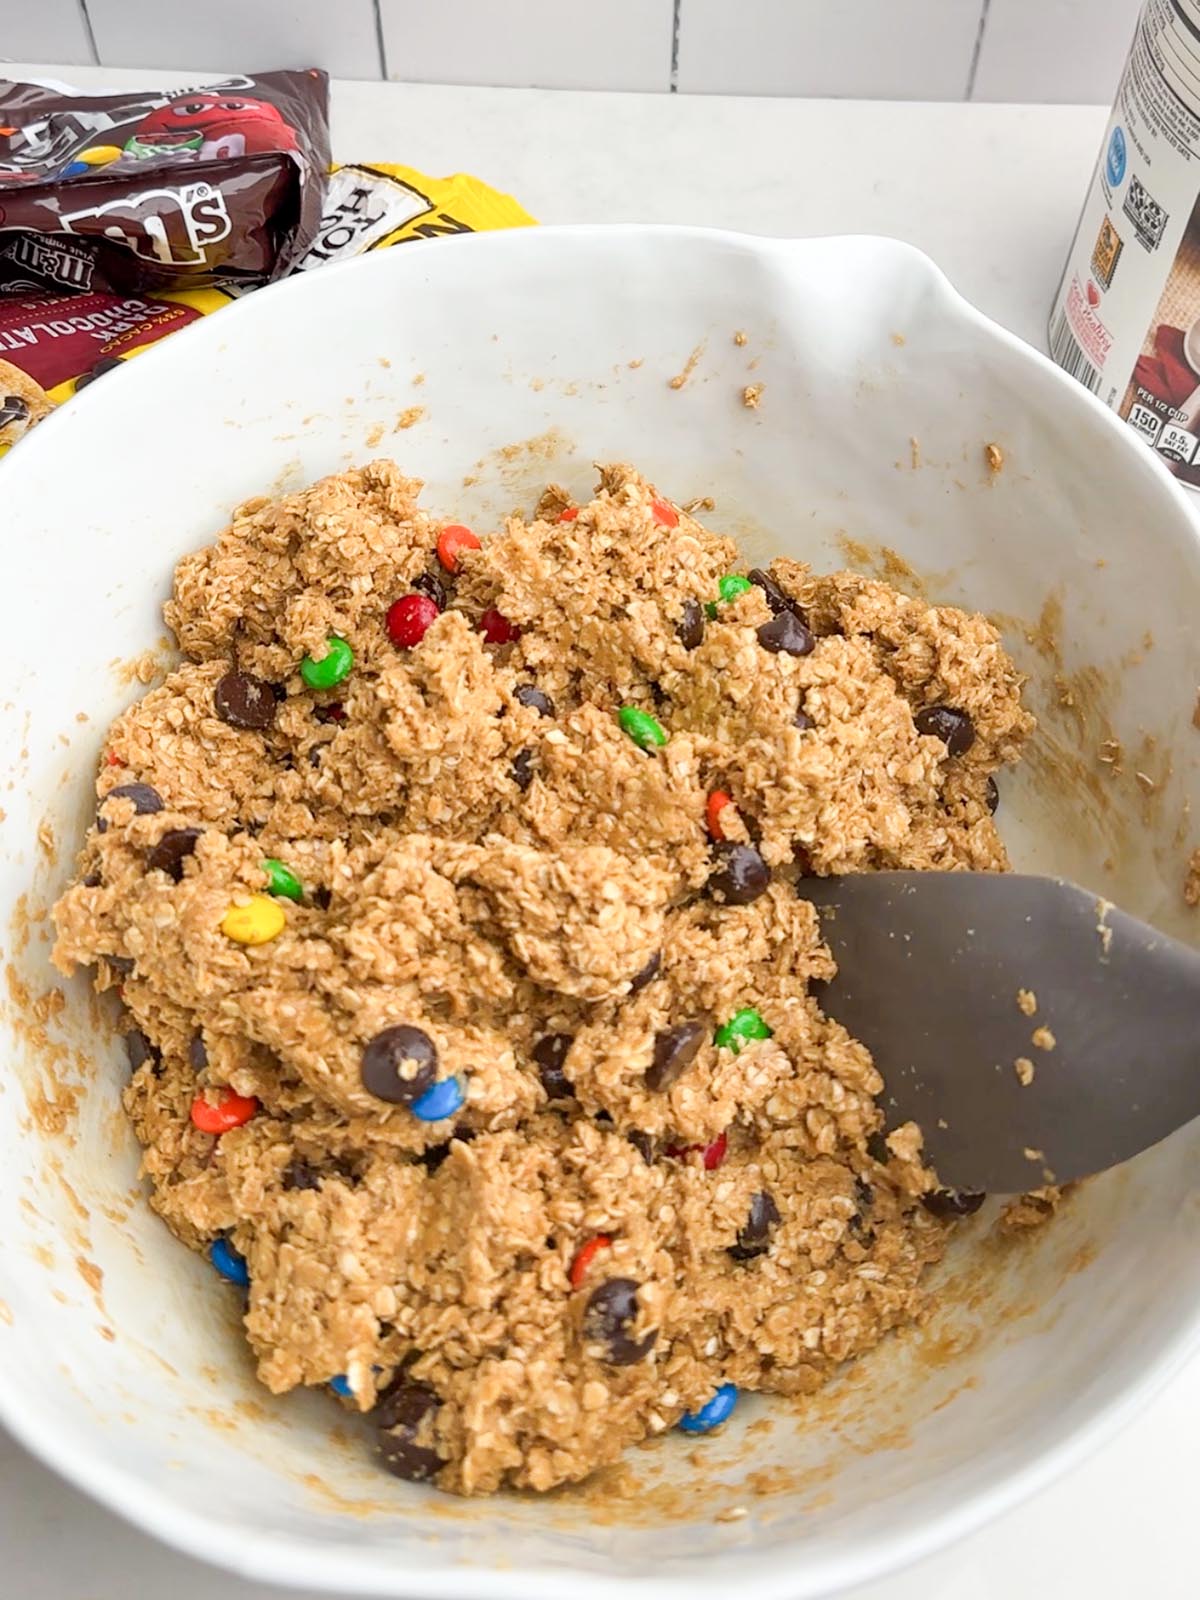 Monster cookie dough with oats, M&Ms, and chocolate chips in a white mixing bowl.